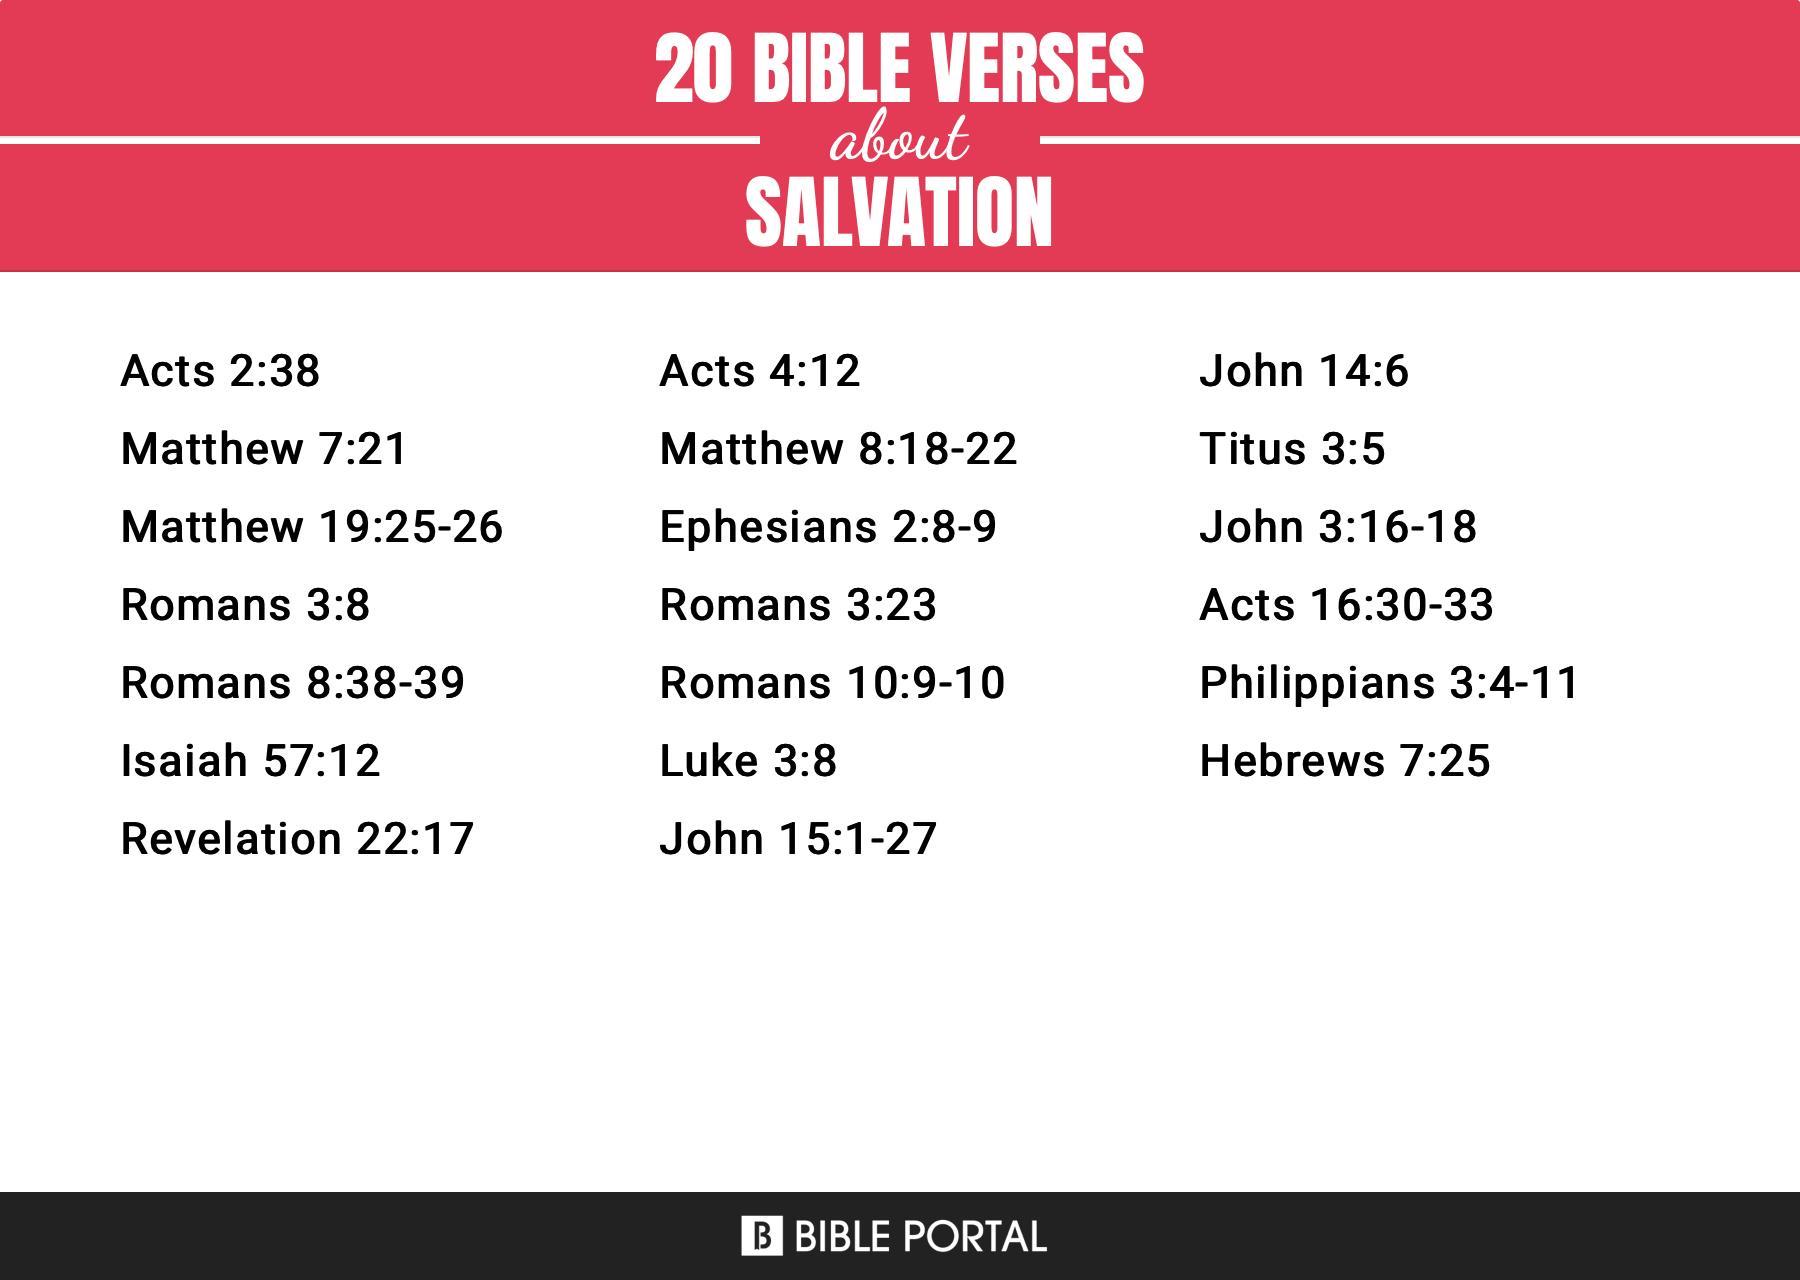 502 Bible Verses about Salvation